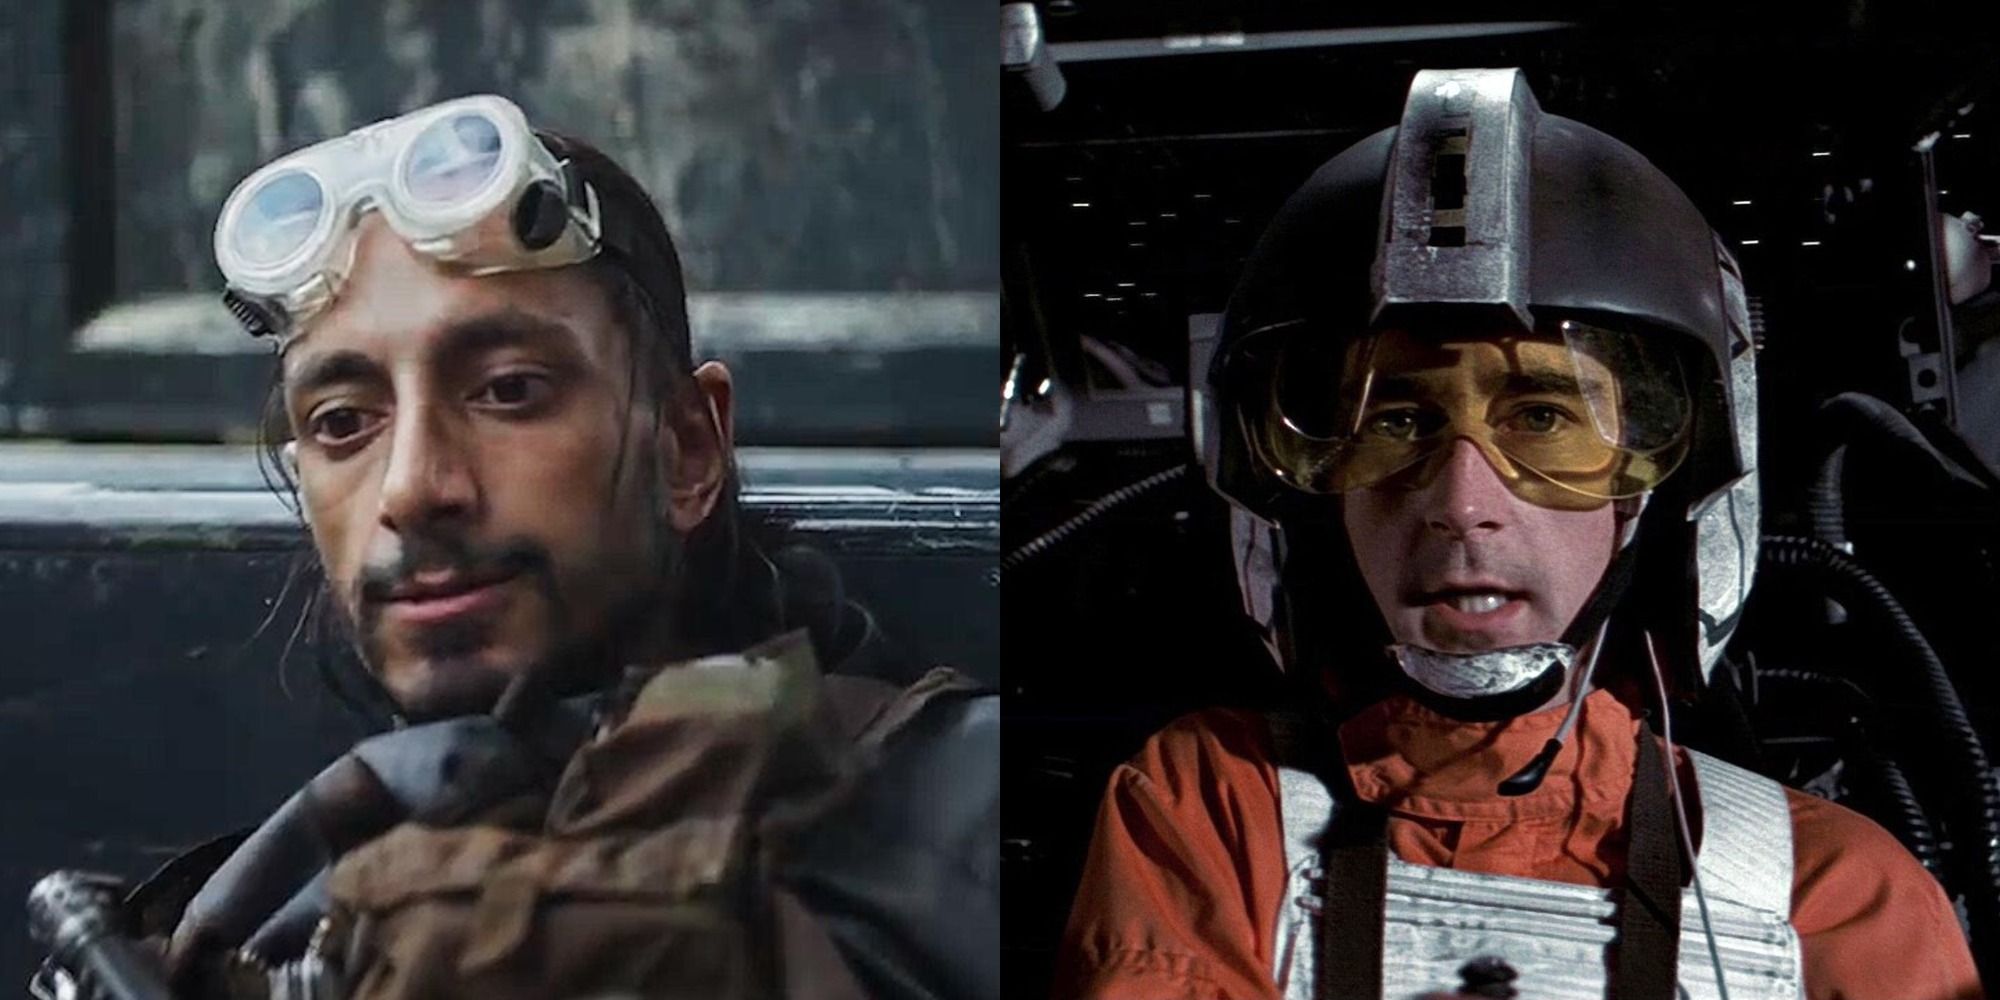 Split image of Riz Ahmed as Bodhi Rook and Denis Lawson as Wedge Antilles